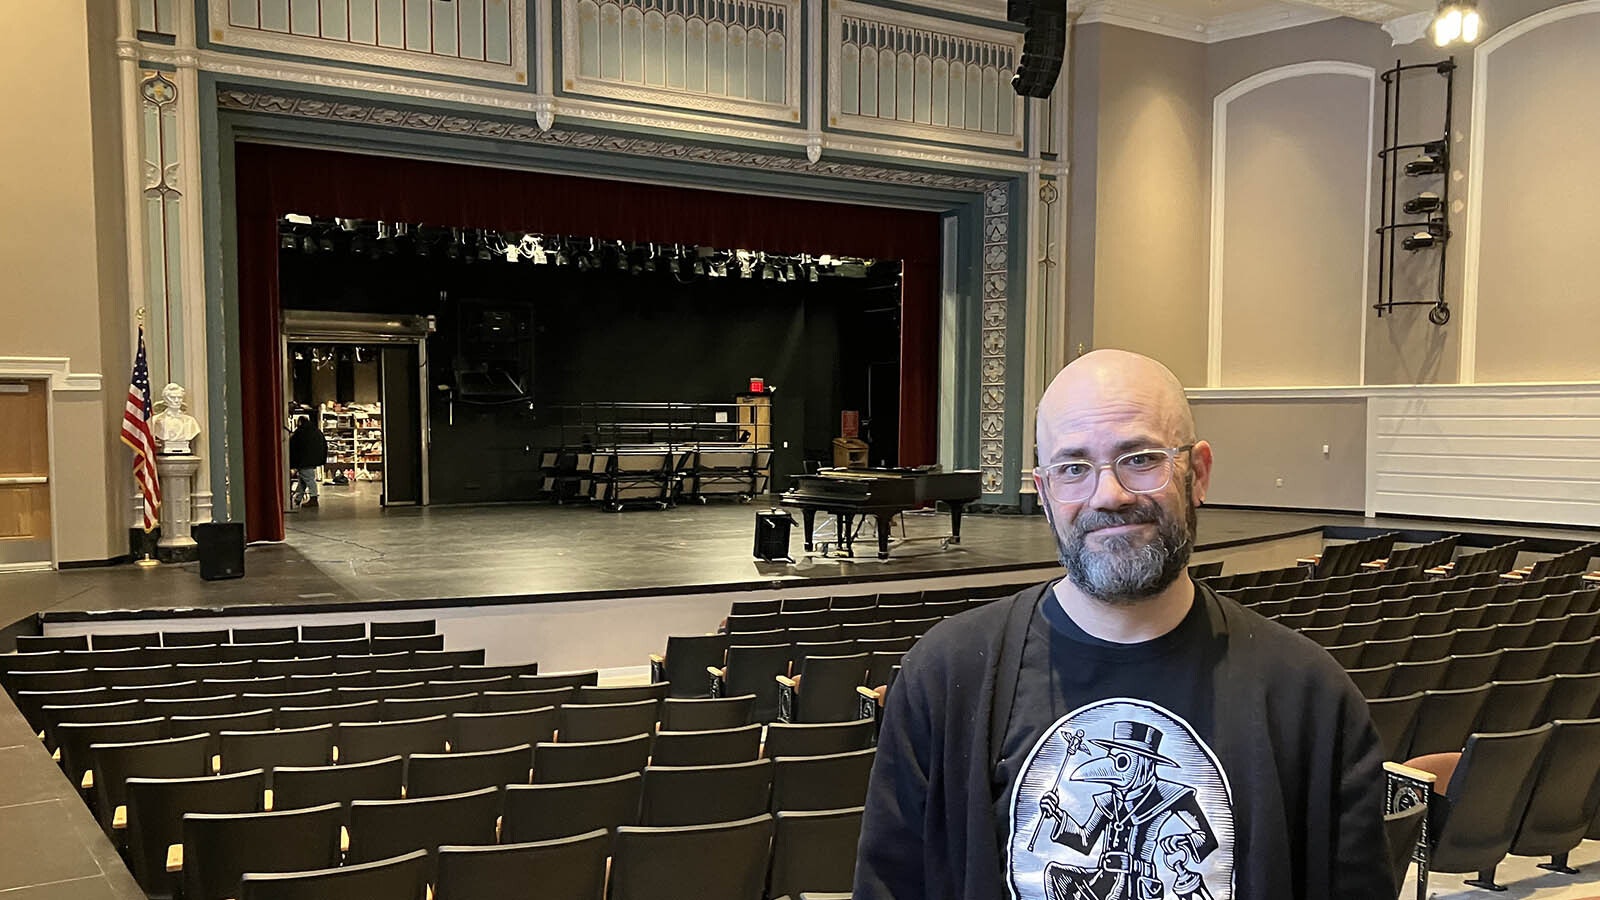 Natrona County High School drama instructor Zachary Schneider leads International Thespian Troupe No. 1 and carries on a tradition that began in 1929 with an NCHS teacher who helped form the society, which in its nearly 100 years has launched many Hollywood careers.